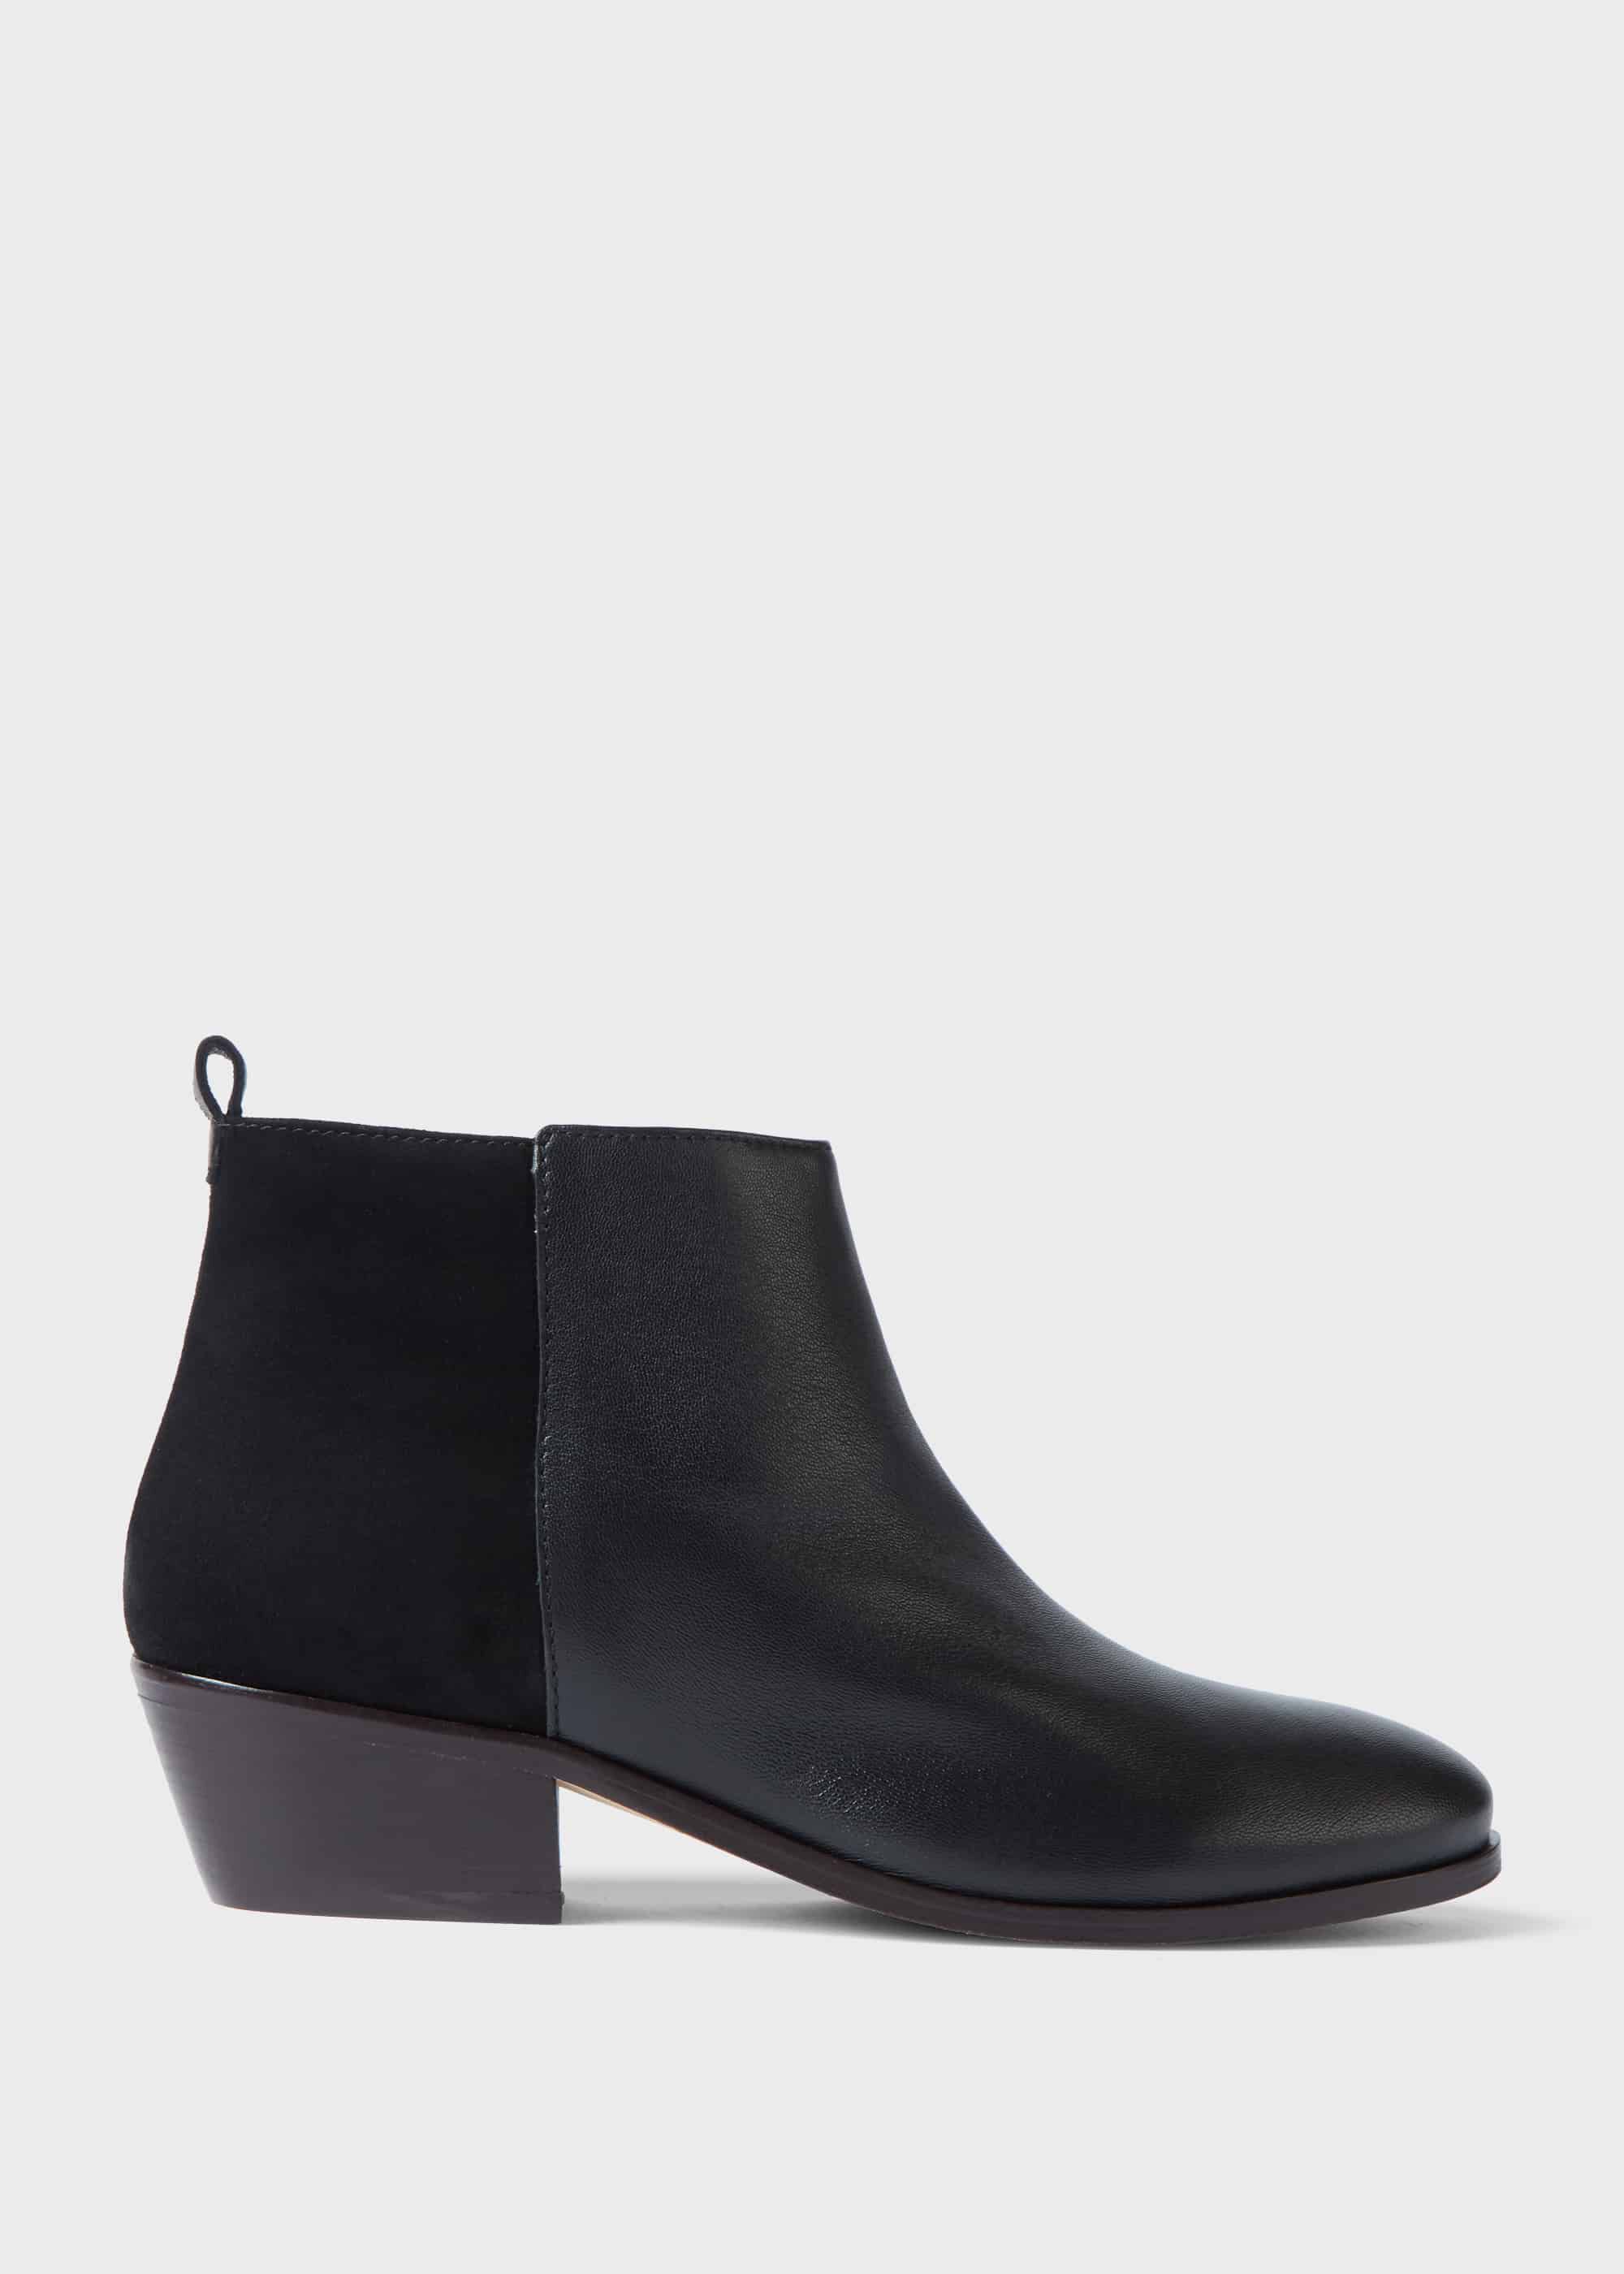 Alice Leather Ankle Boots | Hobbs